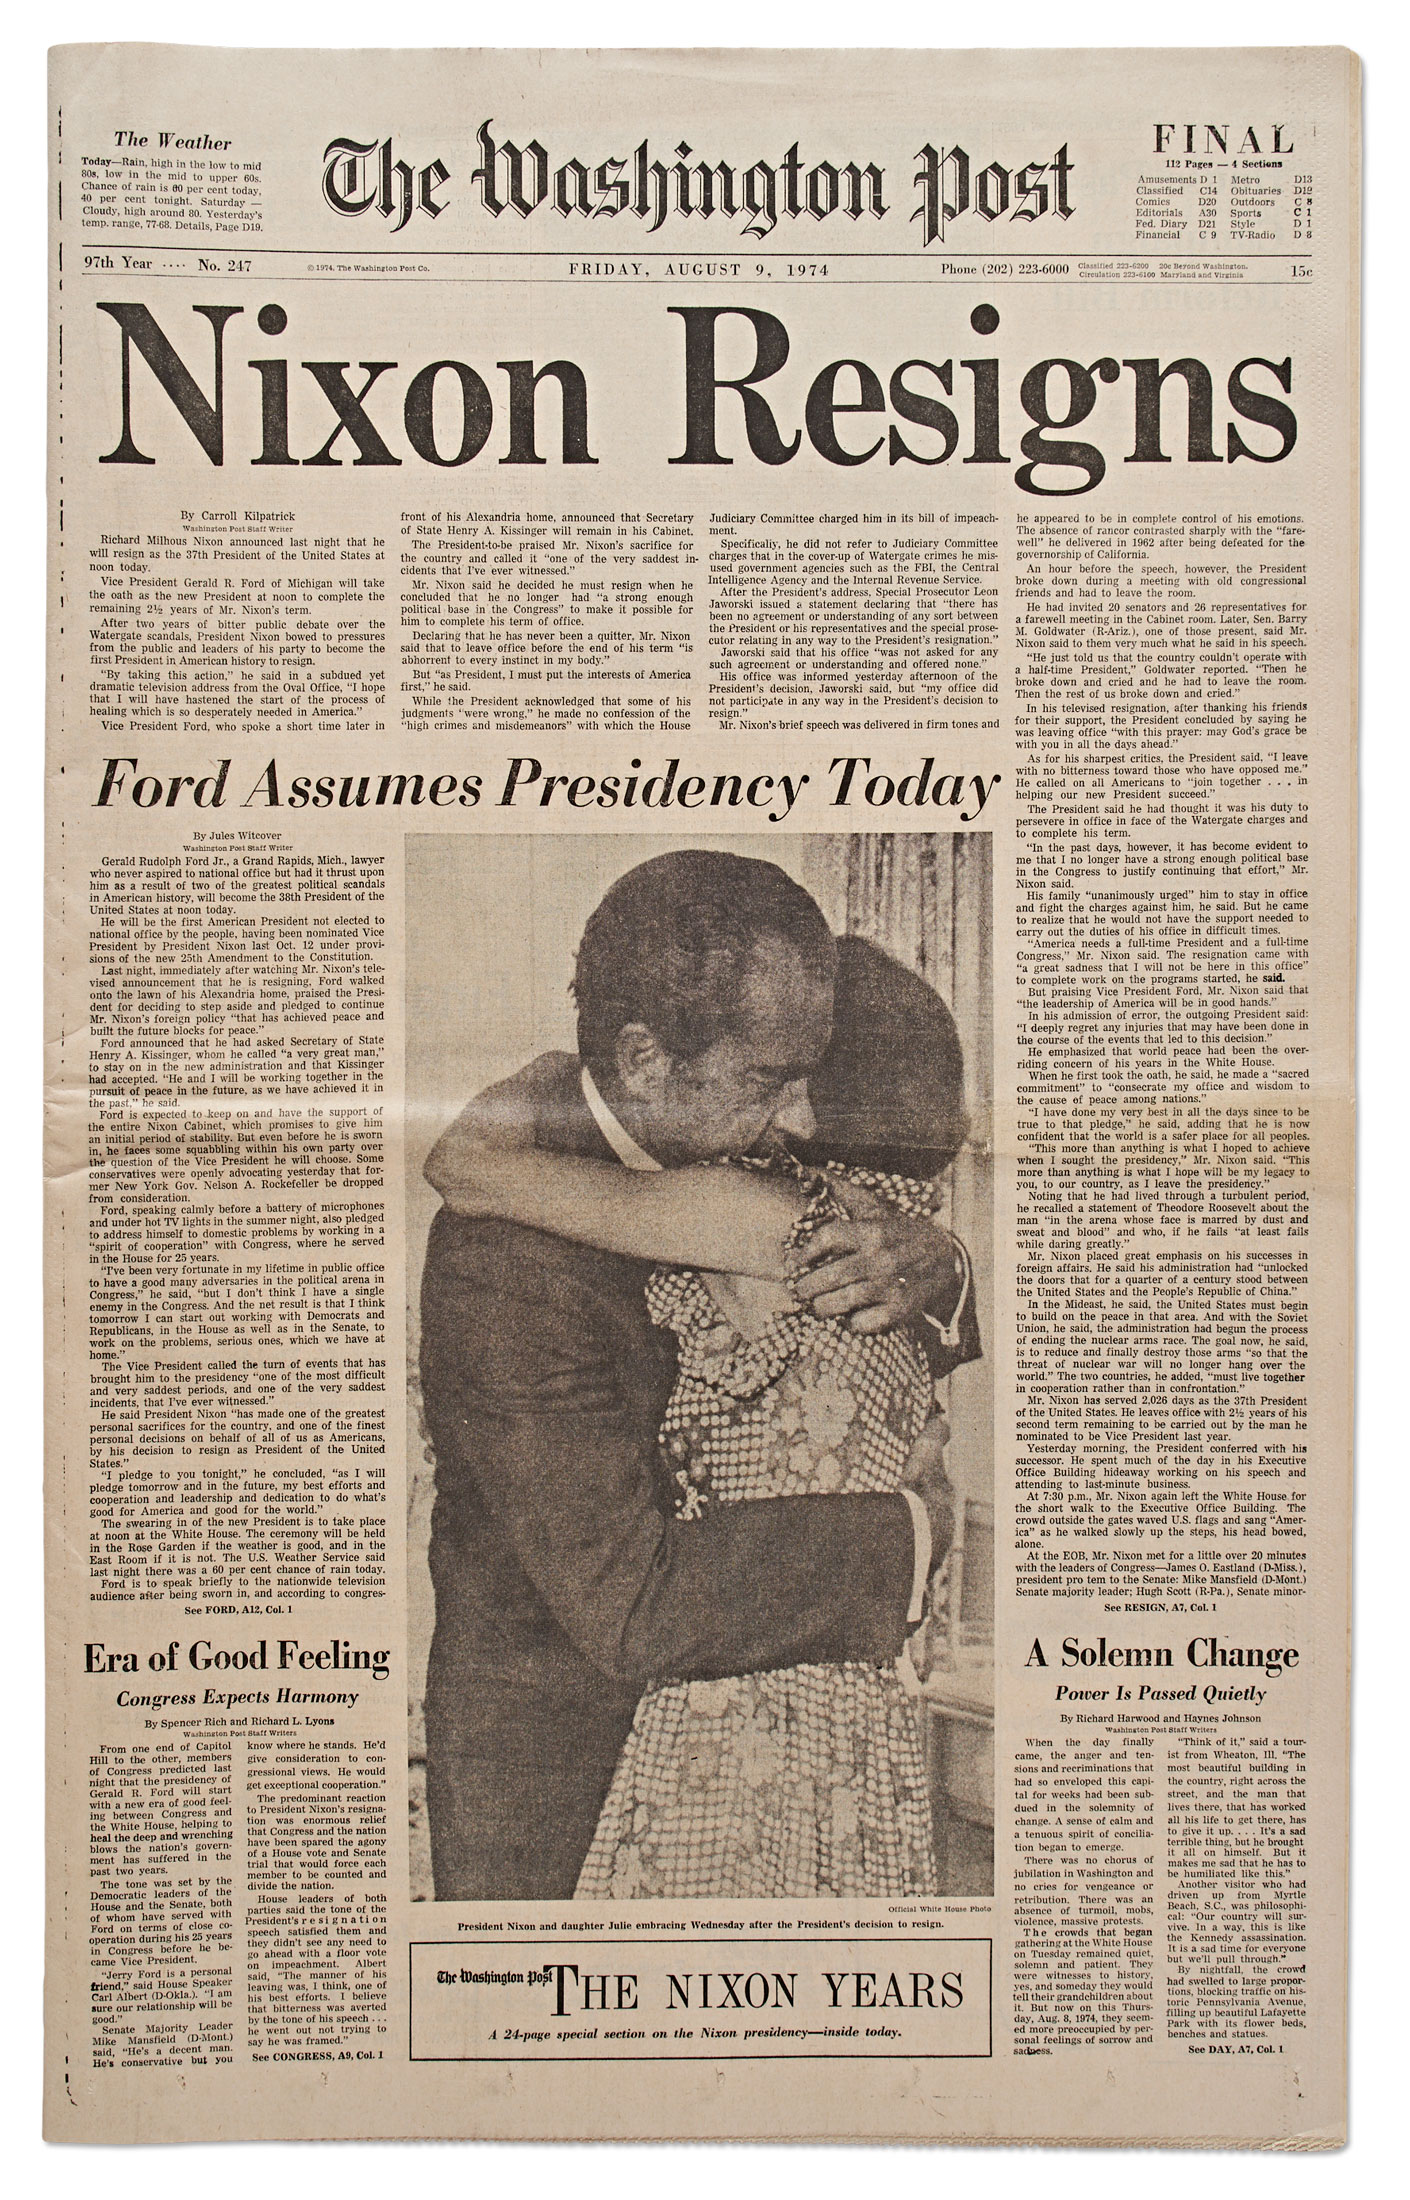 Lot Detail The Washington Post Mat From 9 August 1974 With The Historic Headline Of 